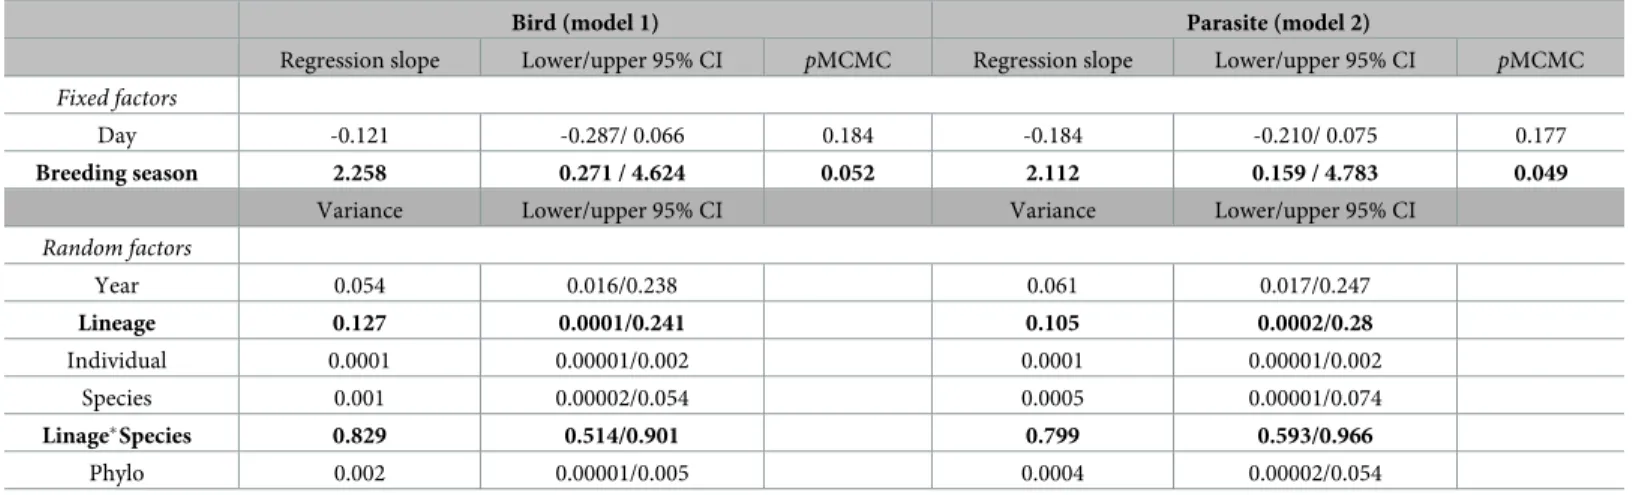 Table 3. Results of both models: models 1 and 2.